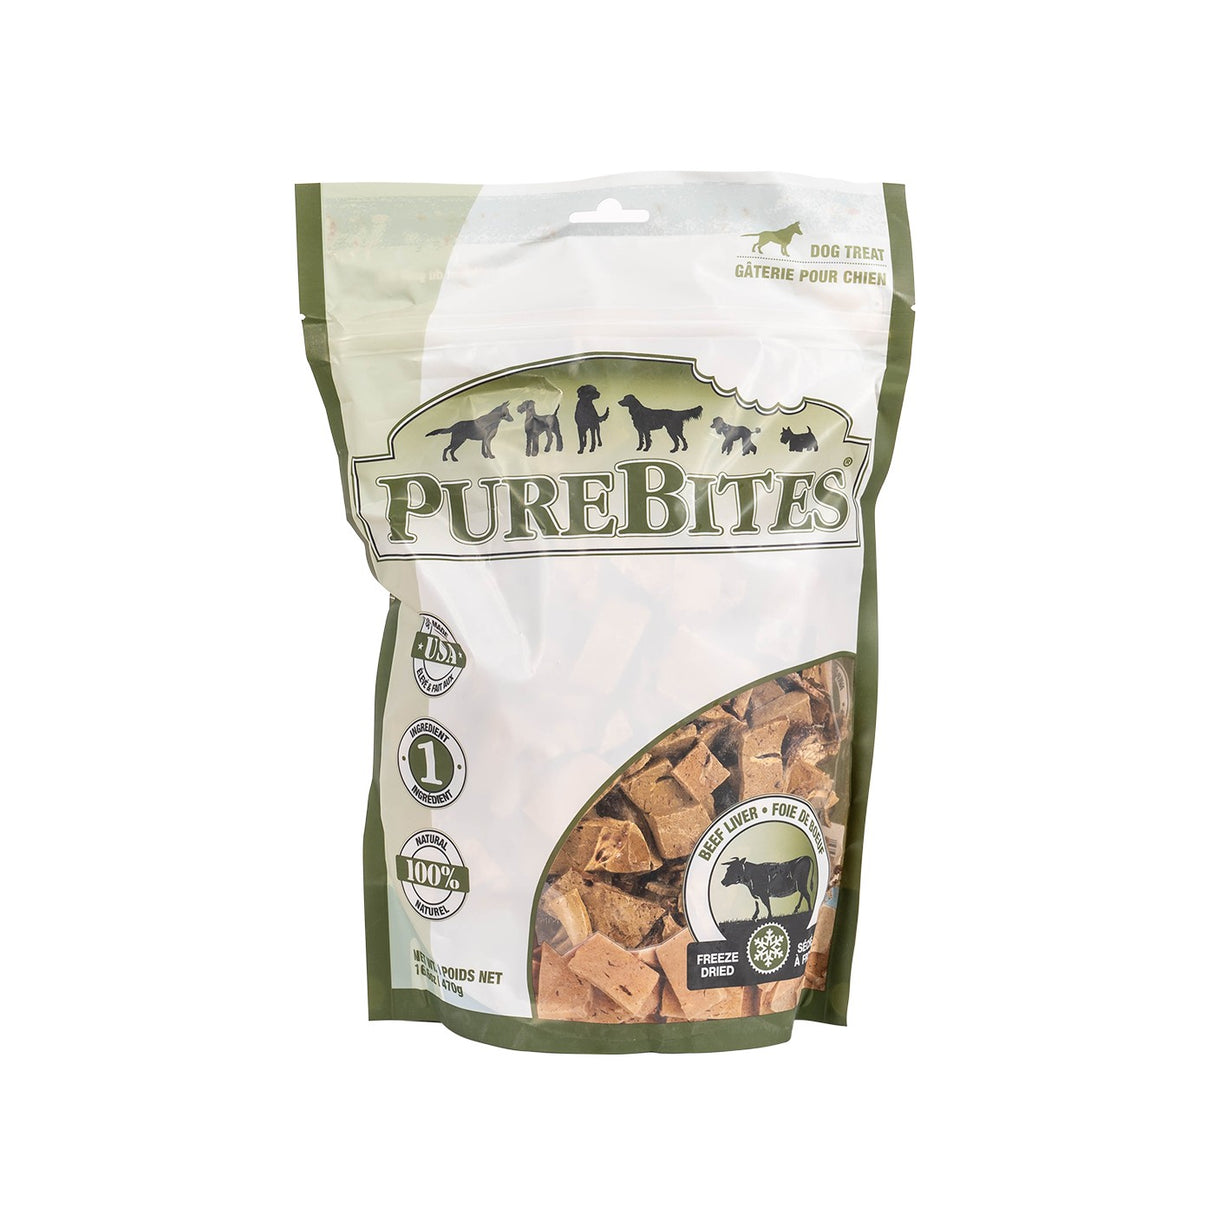 PureBites Shop  Go ahead, look at our ingredients